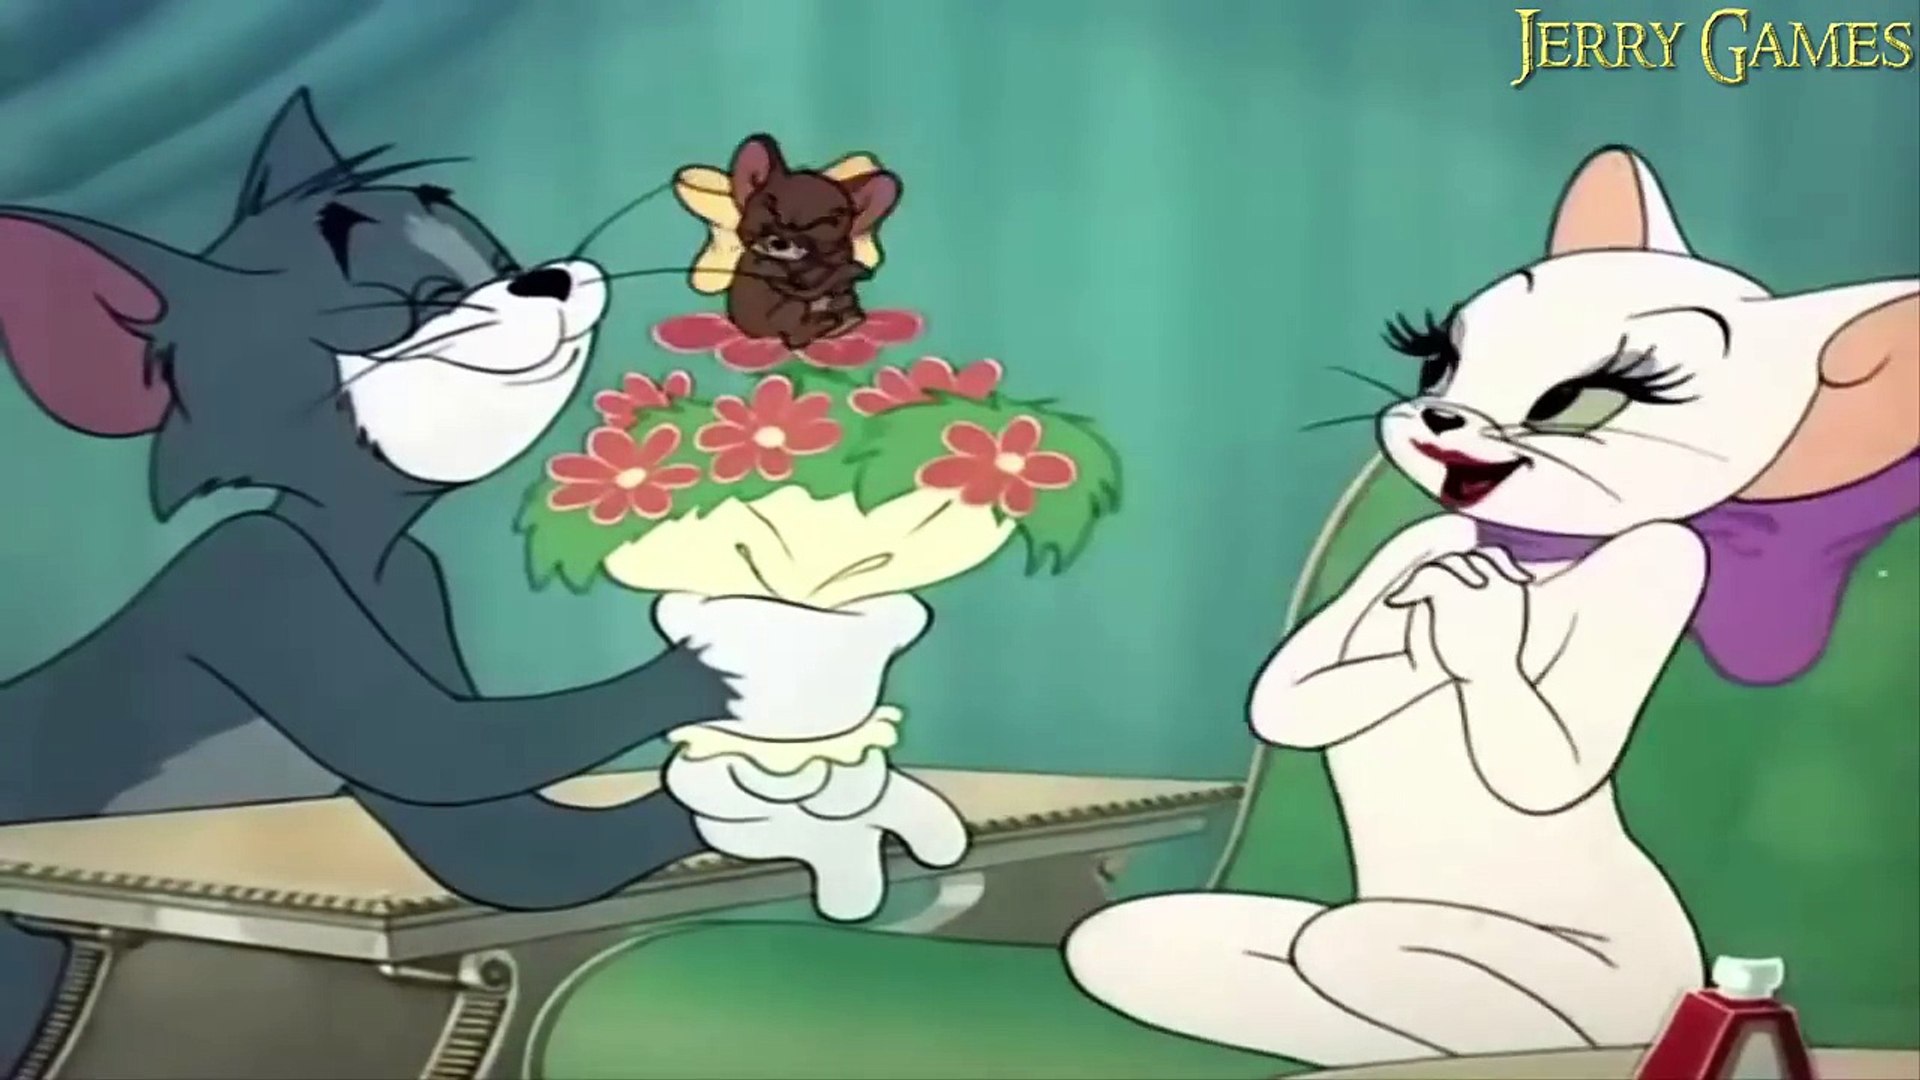 Tom and Jerry Full Episodes | Casanova Cat (1951) Part 1/2 - (Jerry Games)  - video Dailymotion